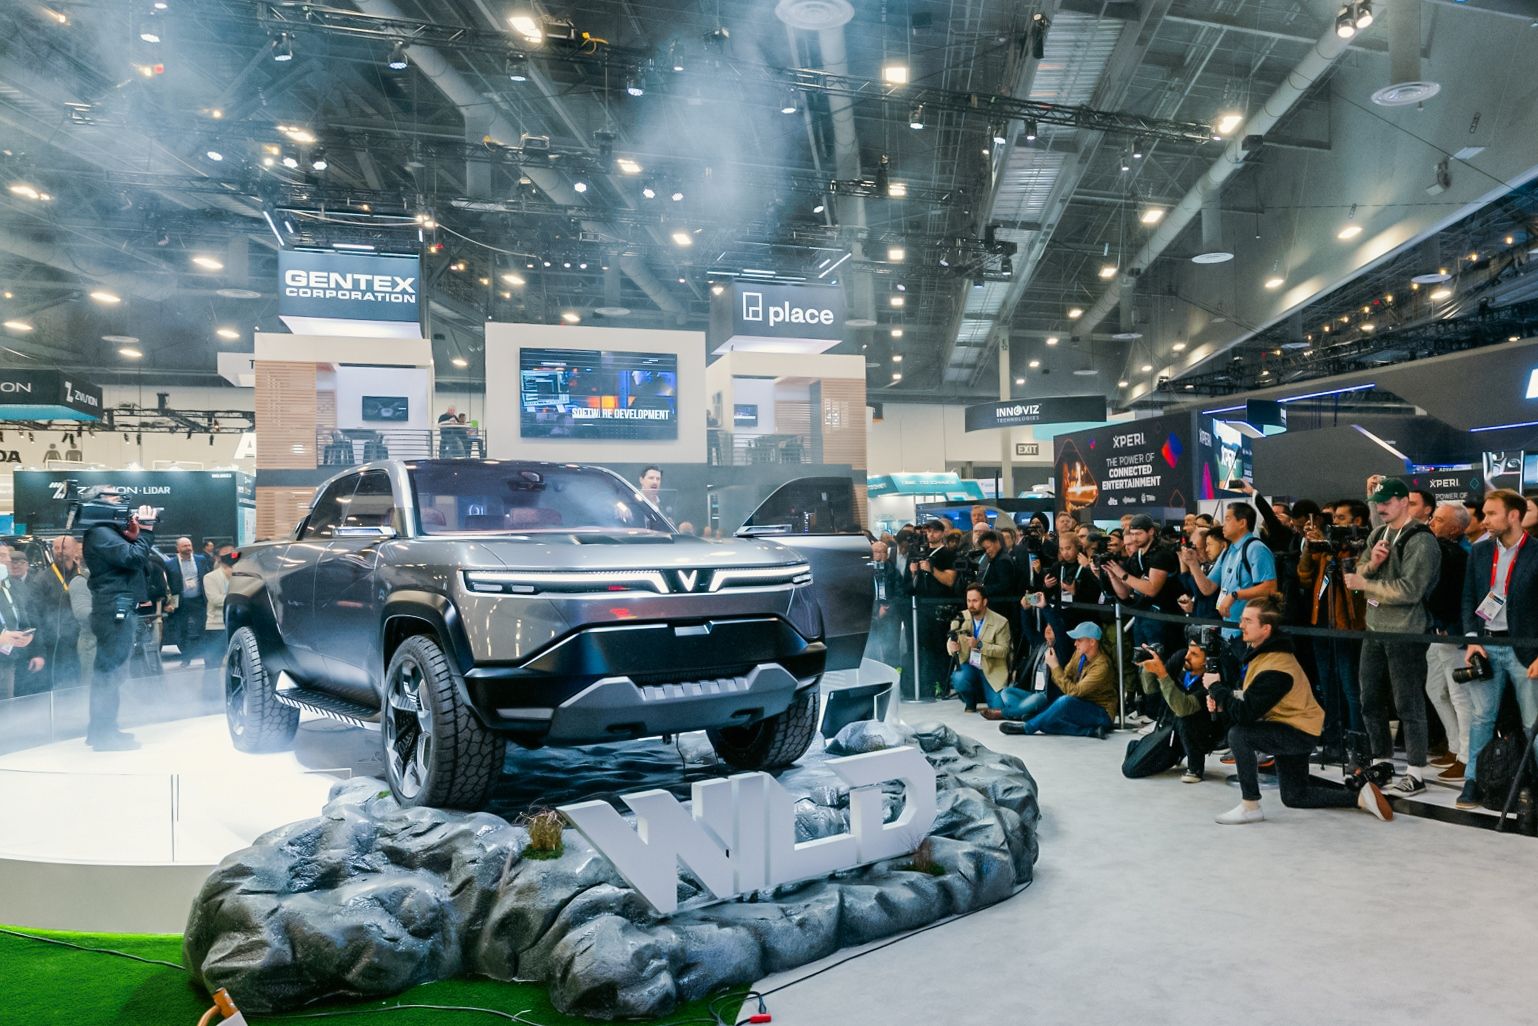 Image of photographers gathered around the Vinfast Wild pickup truck concept at CES